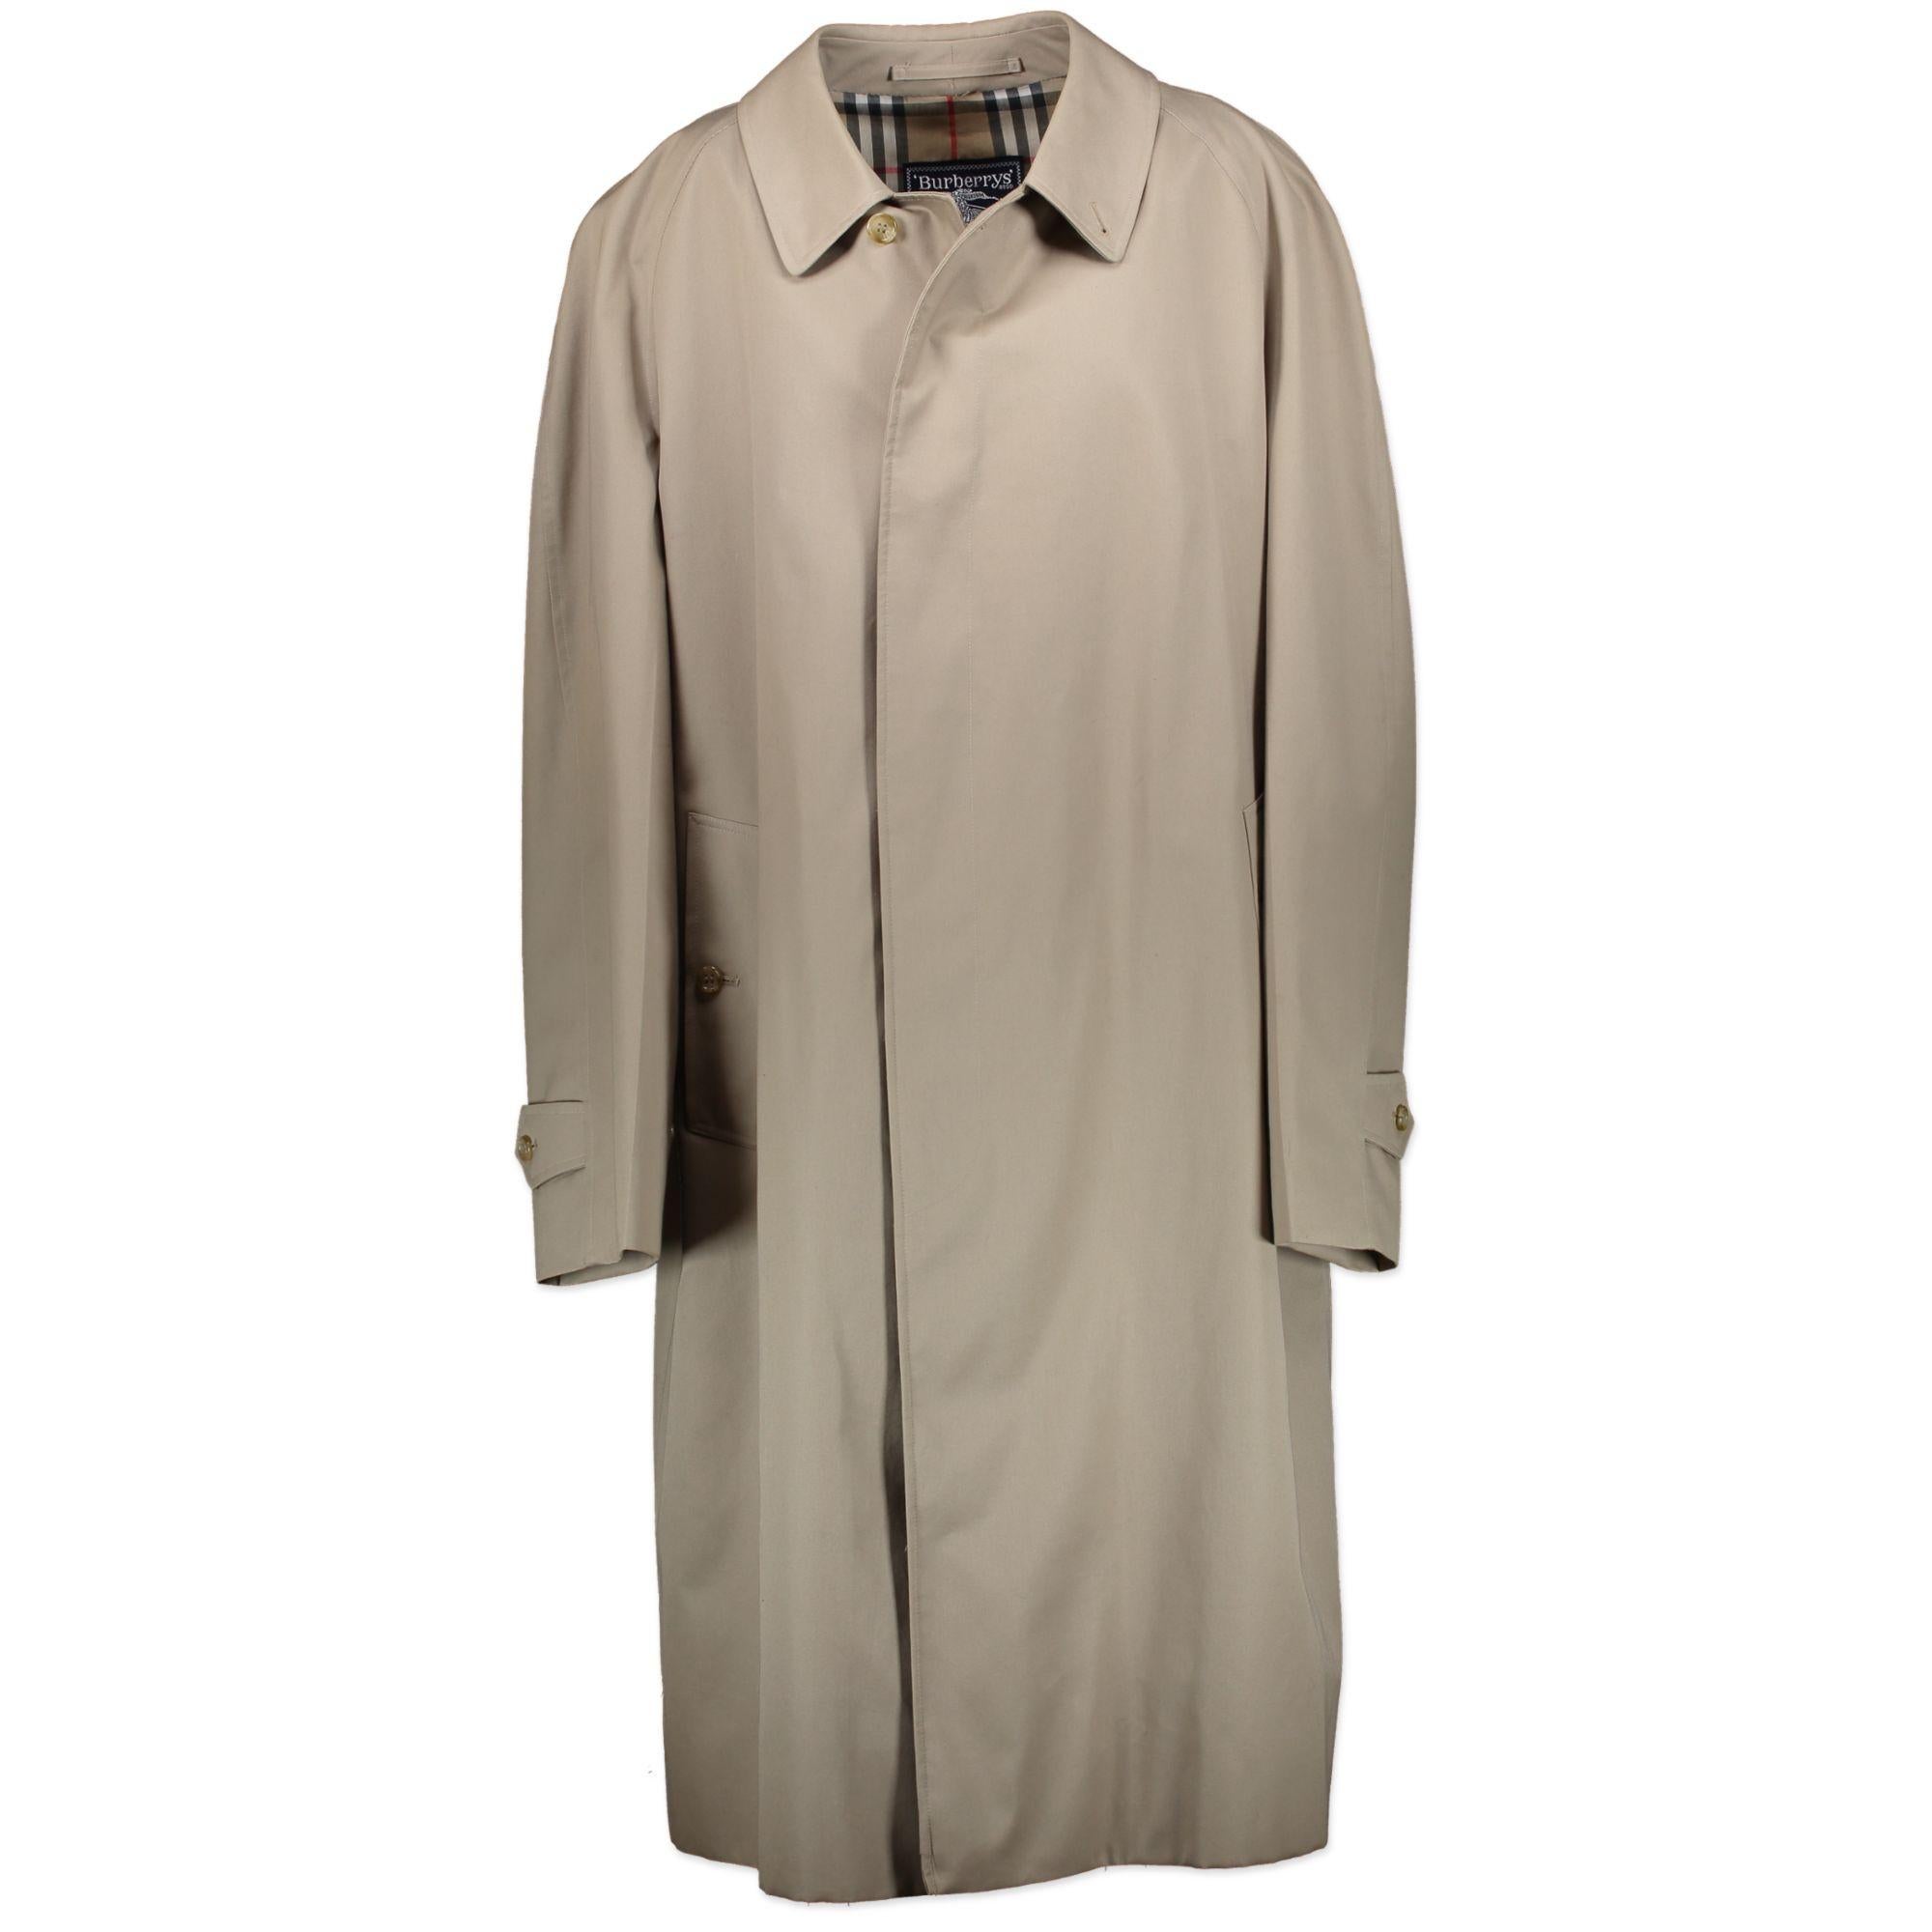 Very Good Condition

Burberry Classic Trenchcoat - Size XXL 

A Burberry trenchcoat is an absolute must-have! With it's iconic patterns and excellent quality, London-based Burberry is a supplier of timeless chic. This particular coat goes all the